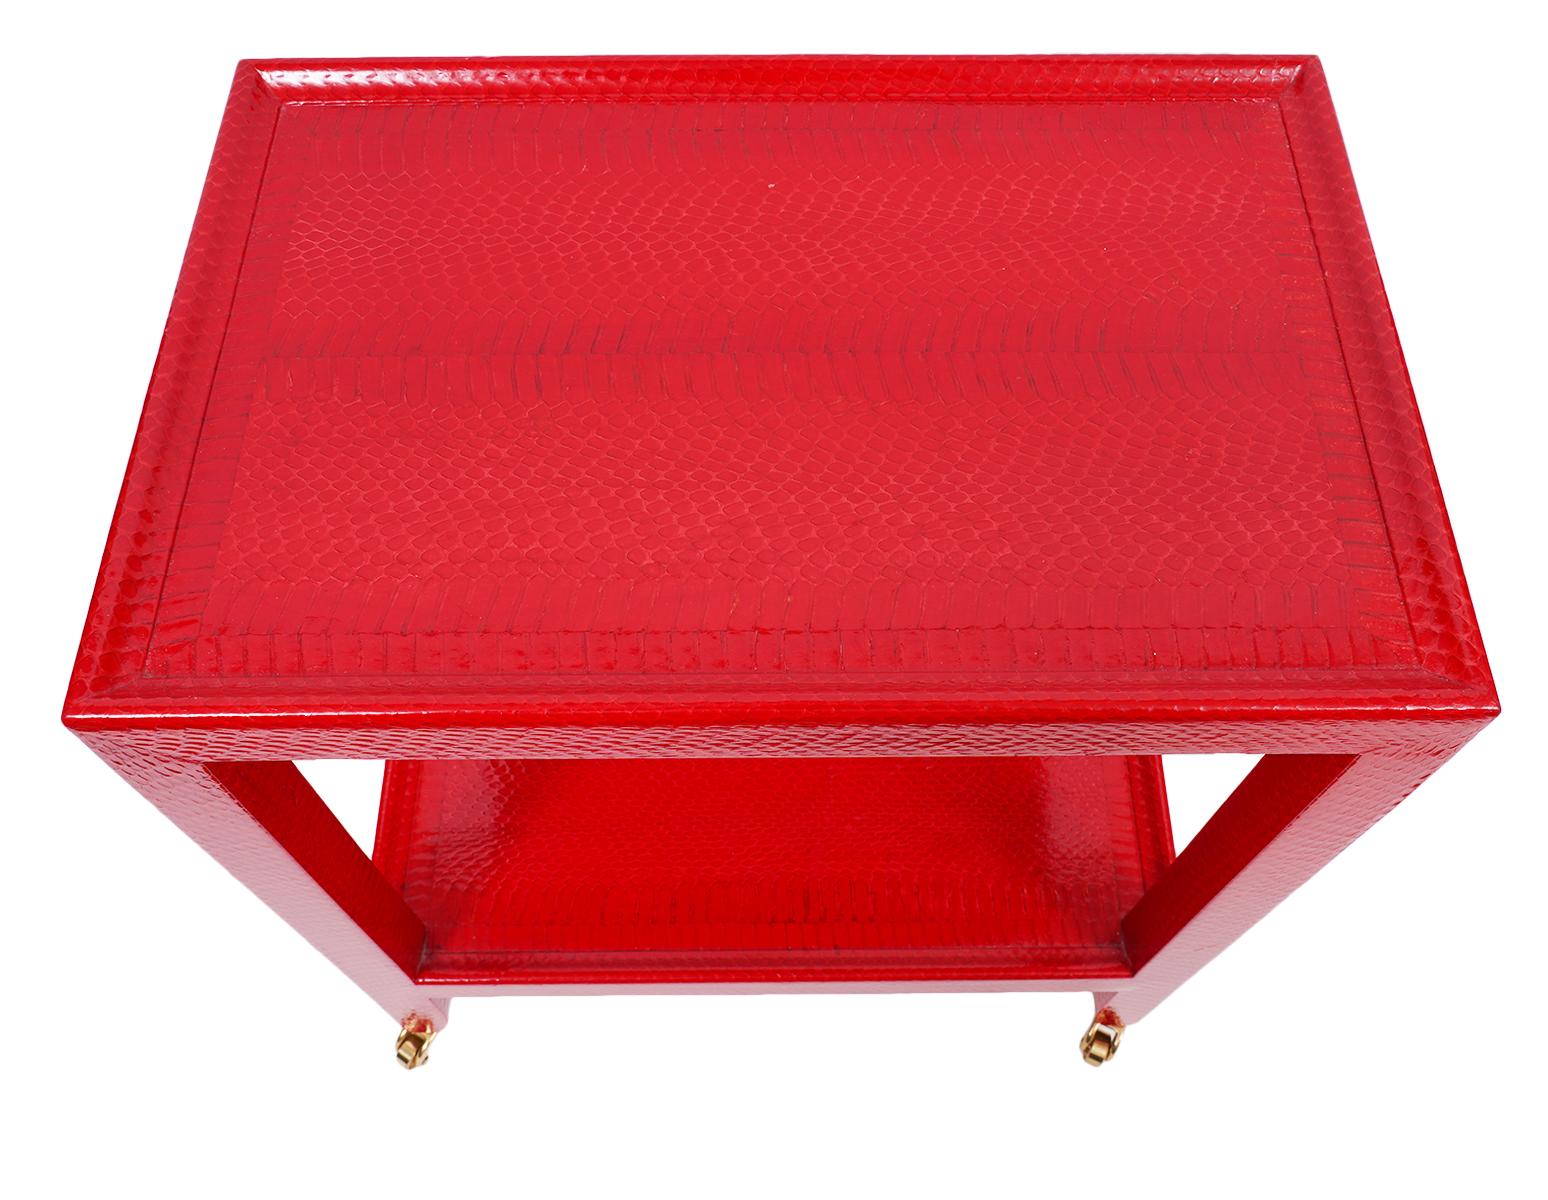 Mary Forssberg telephone table in a sharp red faux snakeskin. Styled after the Karl Springer telephone table. Label on the bottom.